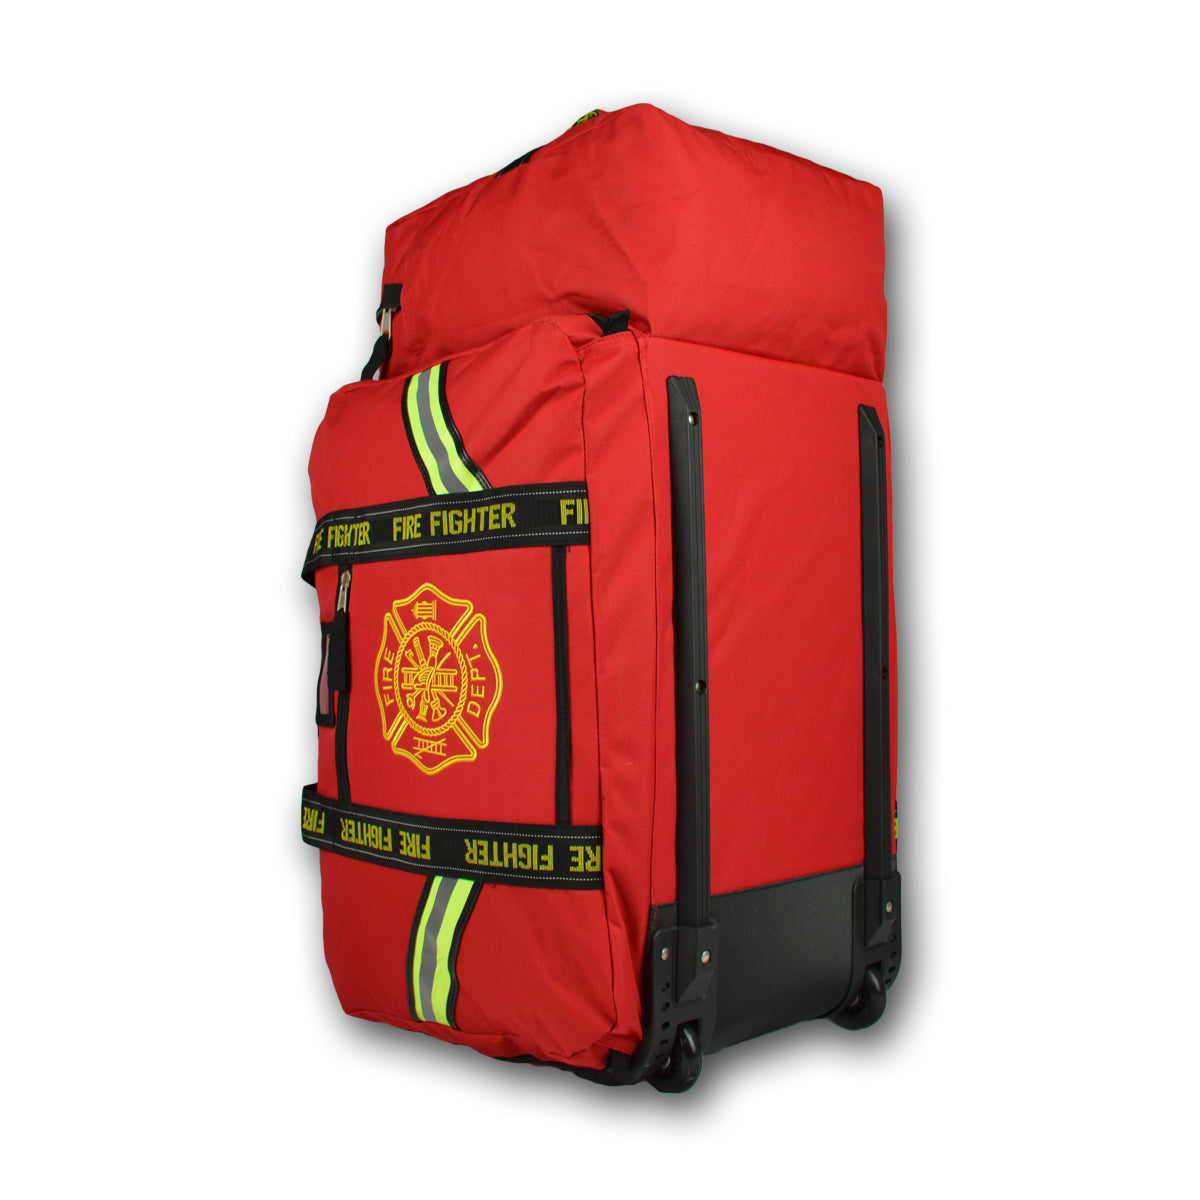 Lightning X “New Top Opening” Value Rolling Firefighter Turnout Gear Bag (LXFB10WV) | Fire Store | Fuego Fire Center | Firefighter Gear | Lightning X Products took your suggestions and redesigned the value rolling gear bag from the ground up to make it more user-friendly and affordable in this tough economy. 